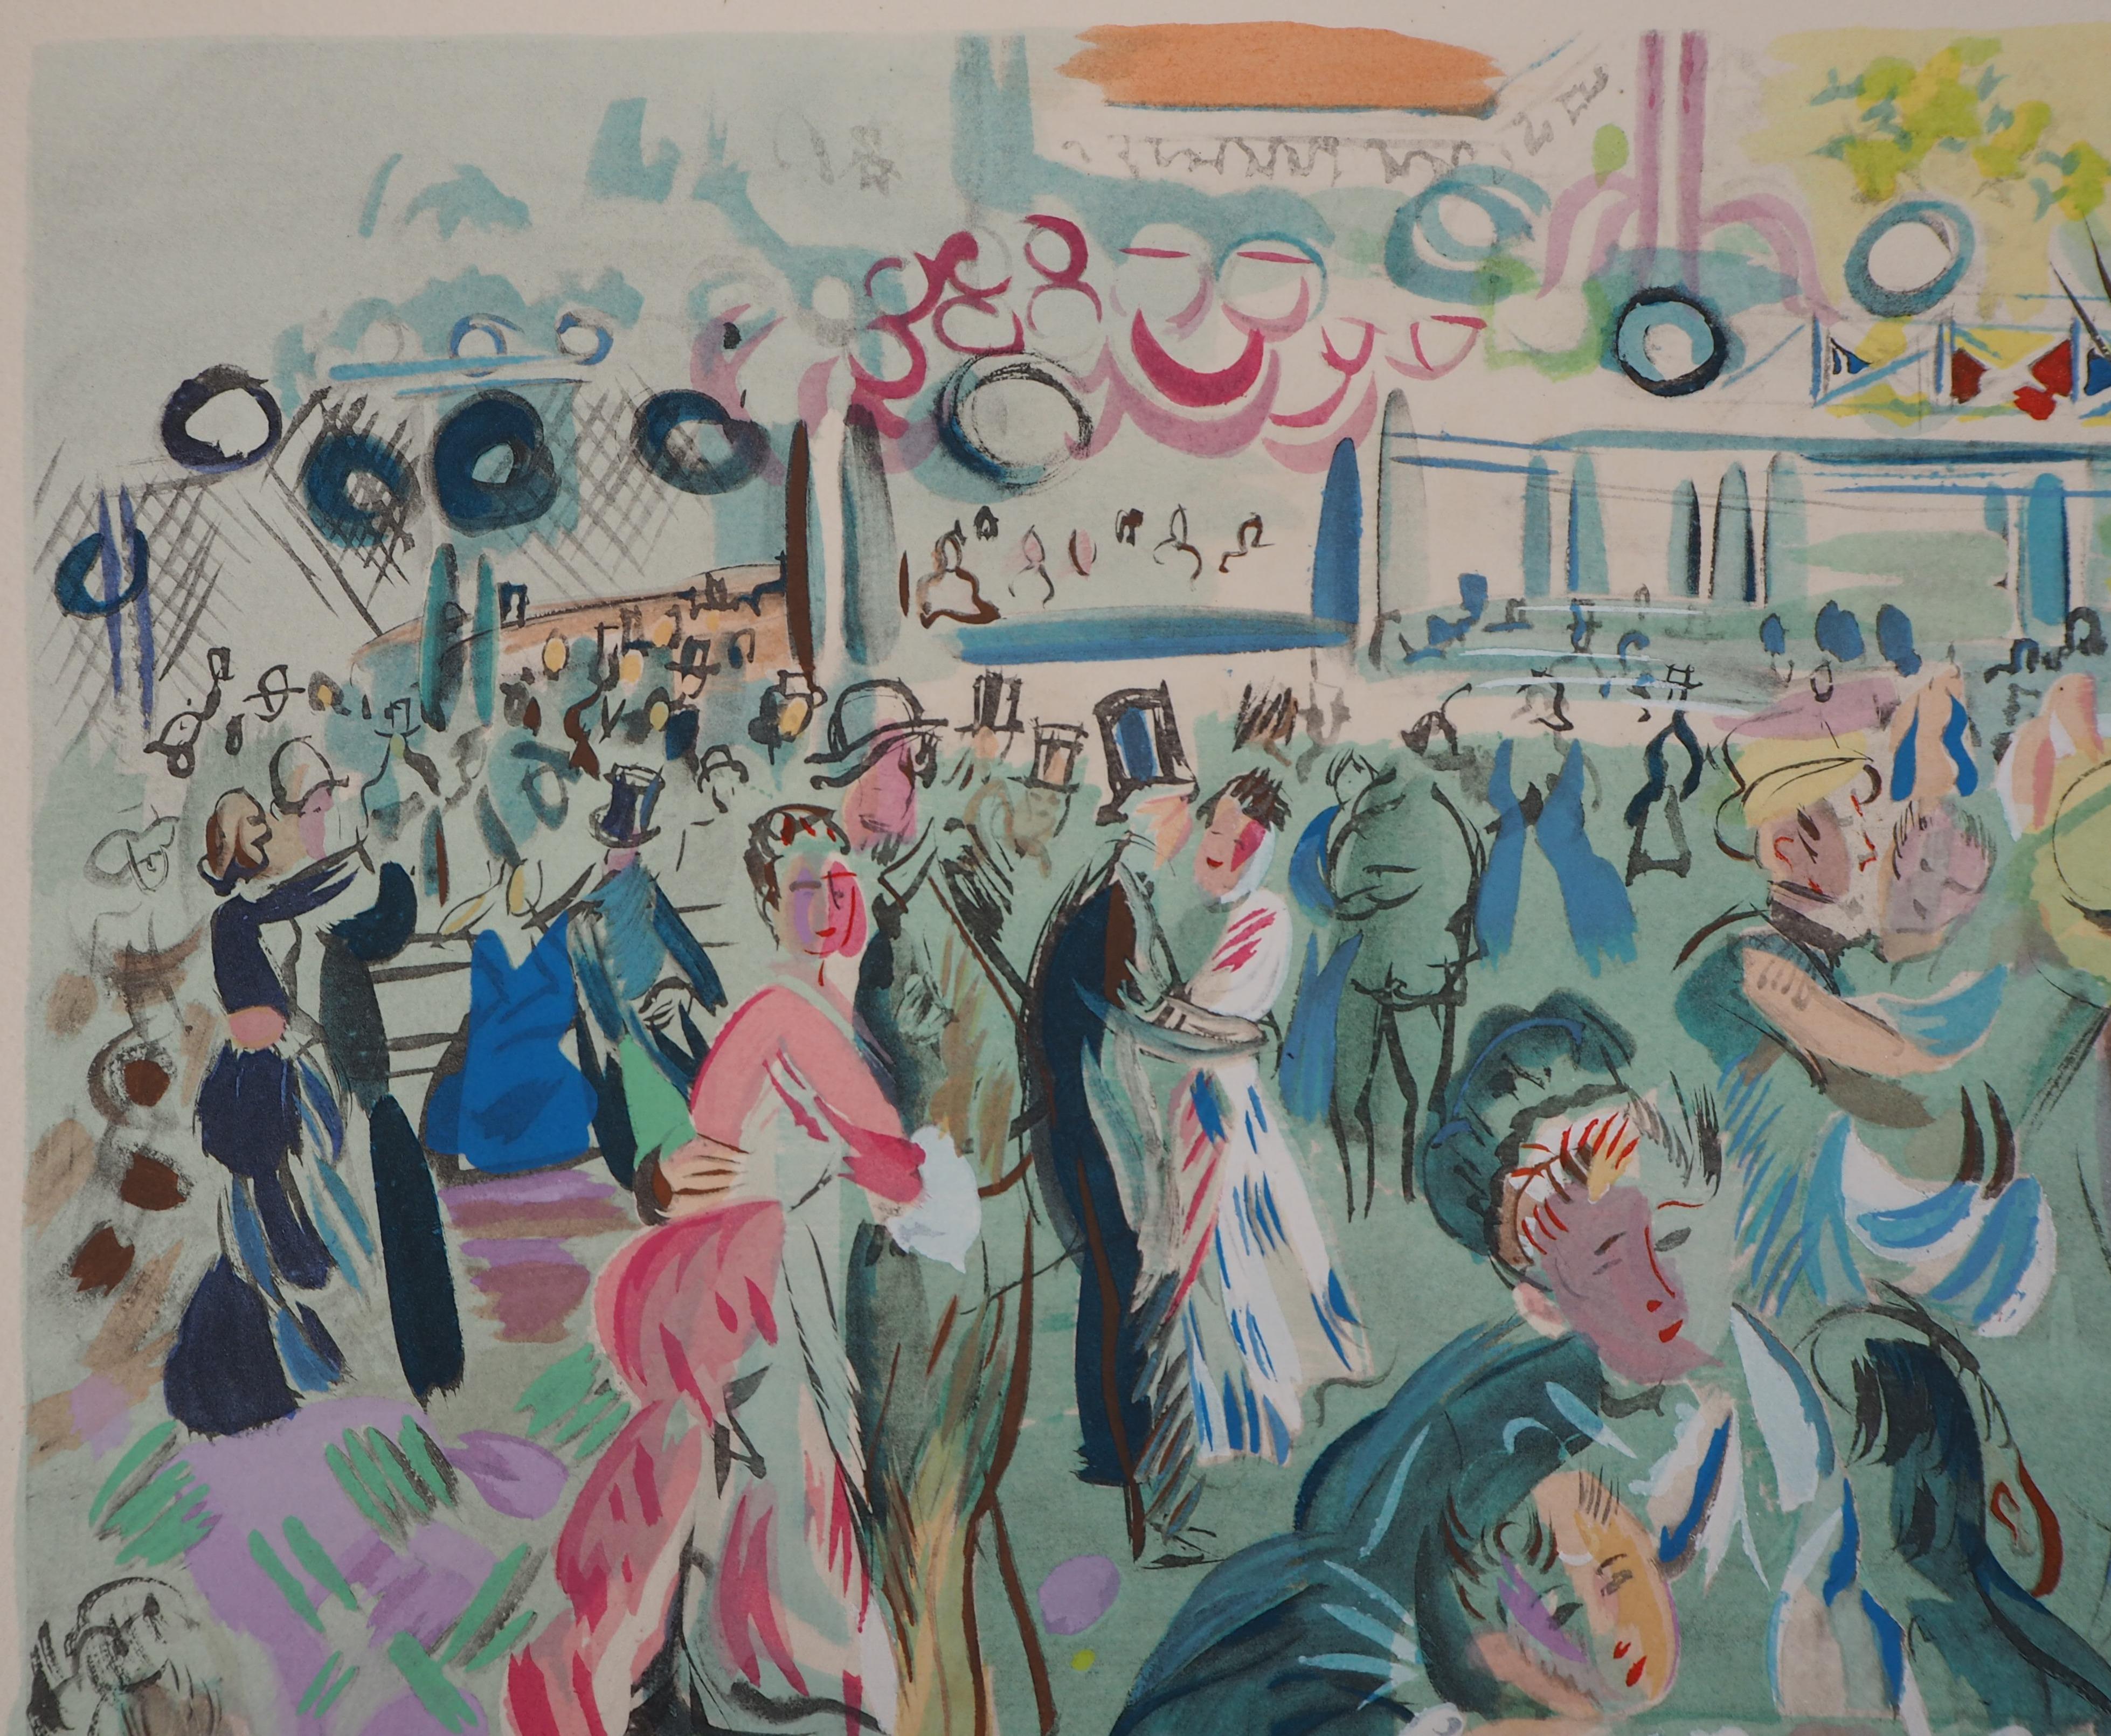 Raoul DUFY
Dancing Cafe, 1953

Original Lithograph with stencil watercolor
With printed signature in the plate
On Arches vellum
28 x 38 cm (c. 11 x 15 inch)

Very good condition